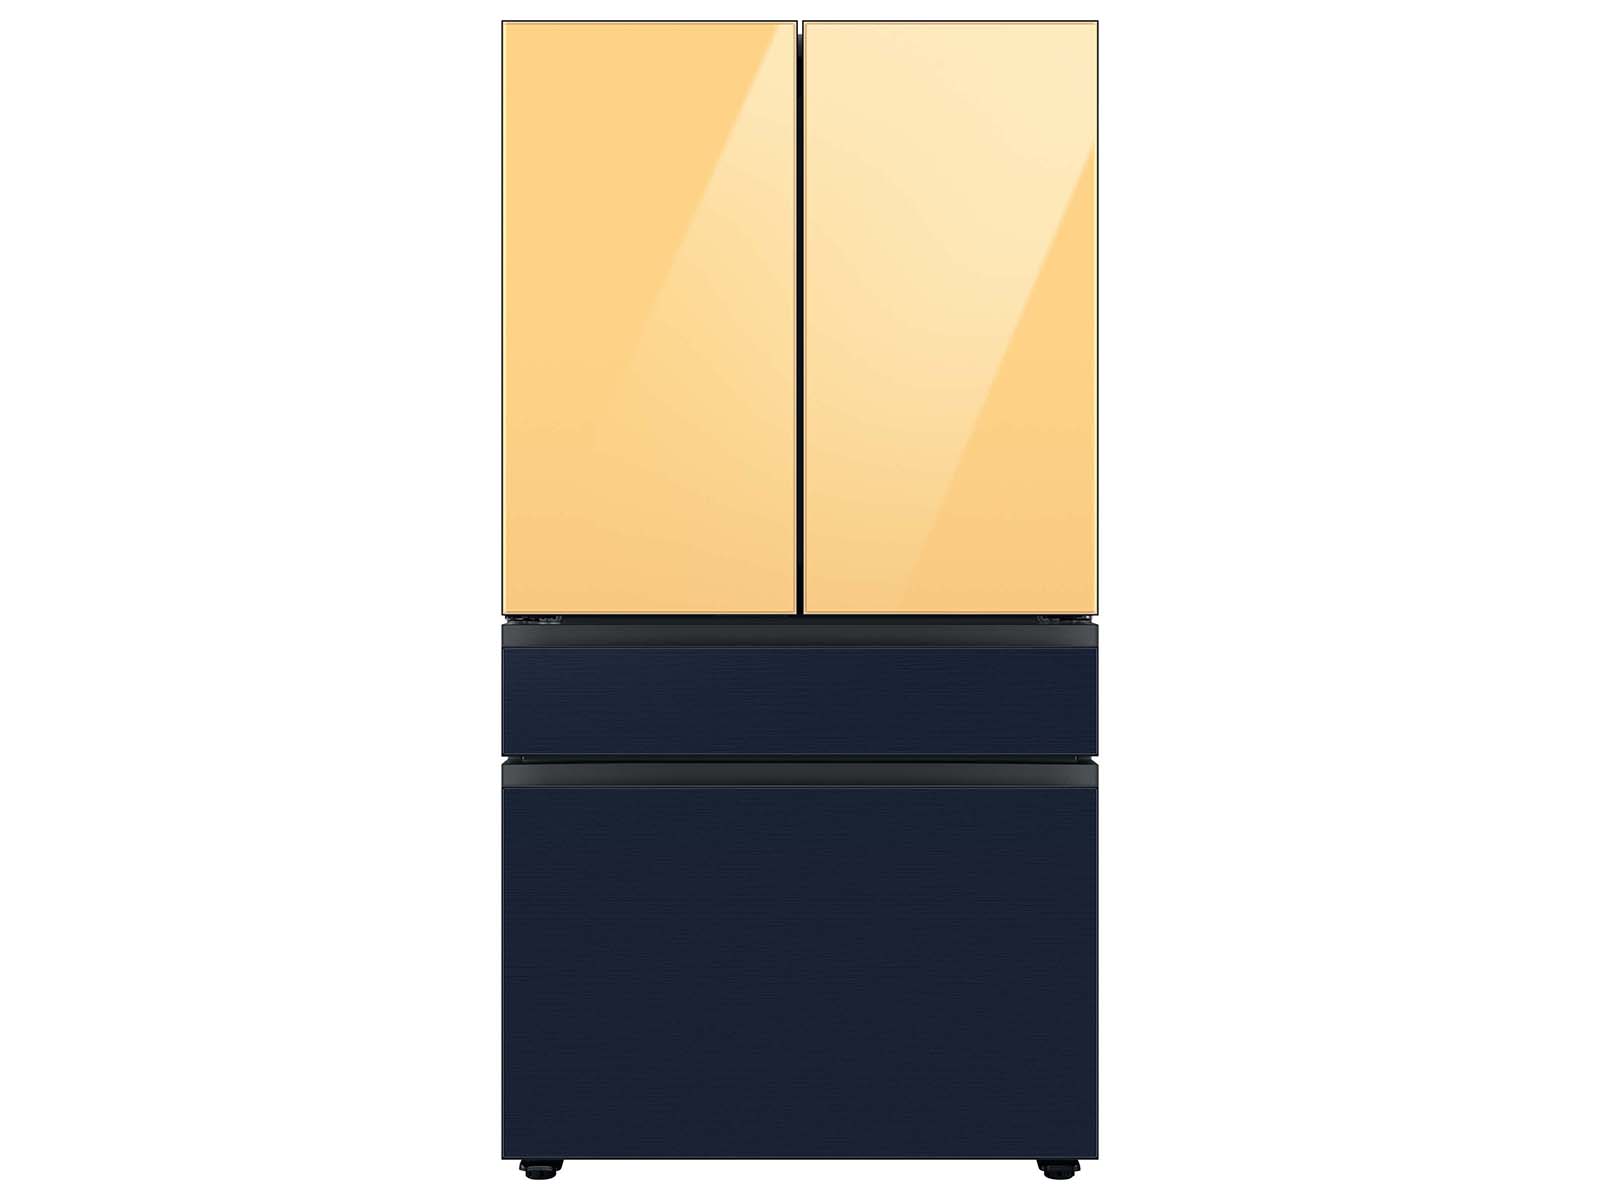 Bespoke 4-Door French Door Refrigerator (29 cu. ft.) with Customizable Door Panel Colors and Beverage Center™ in Sunrise Yellow Glass Top, White Glass Middle, and Morning Blue Glass Bottom Panels